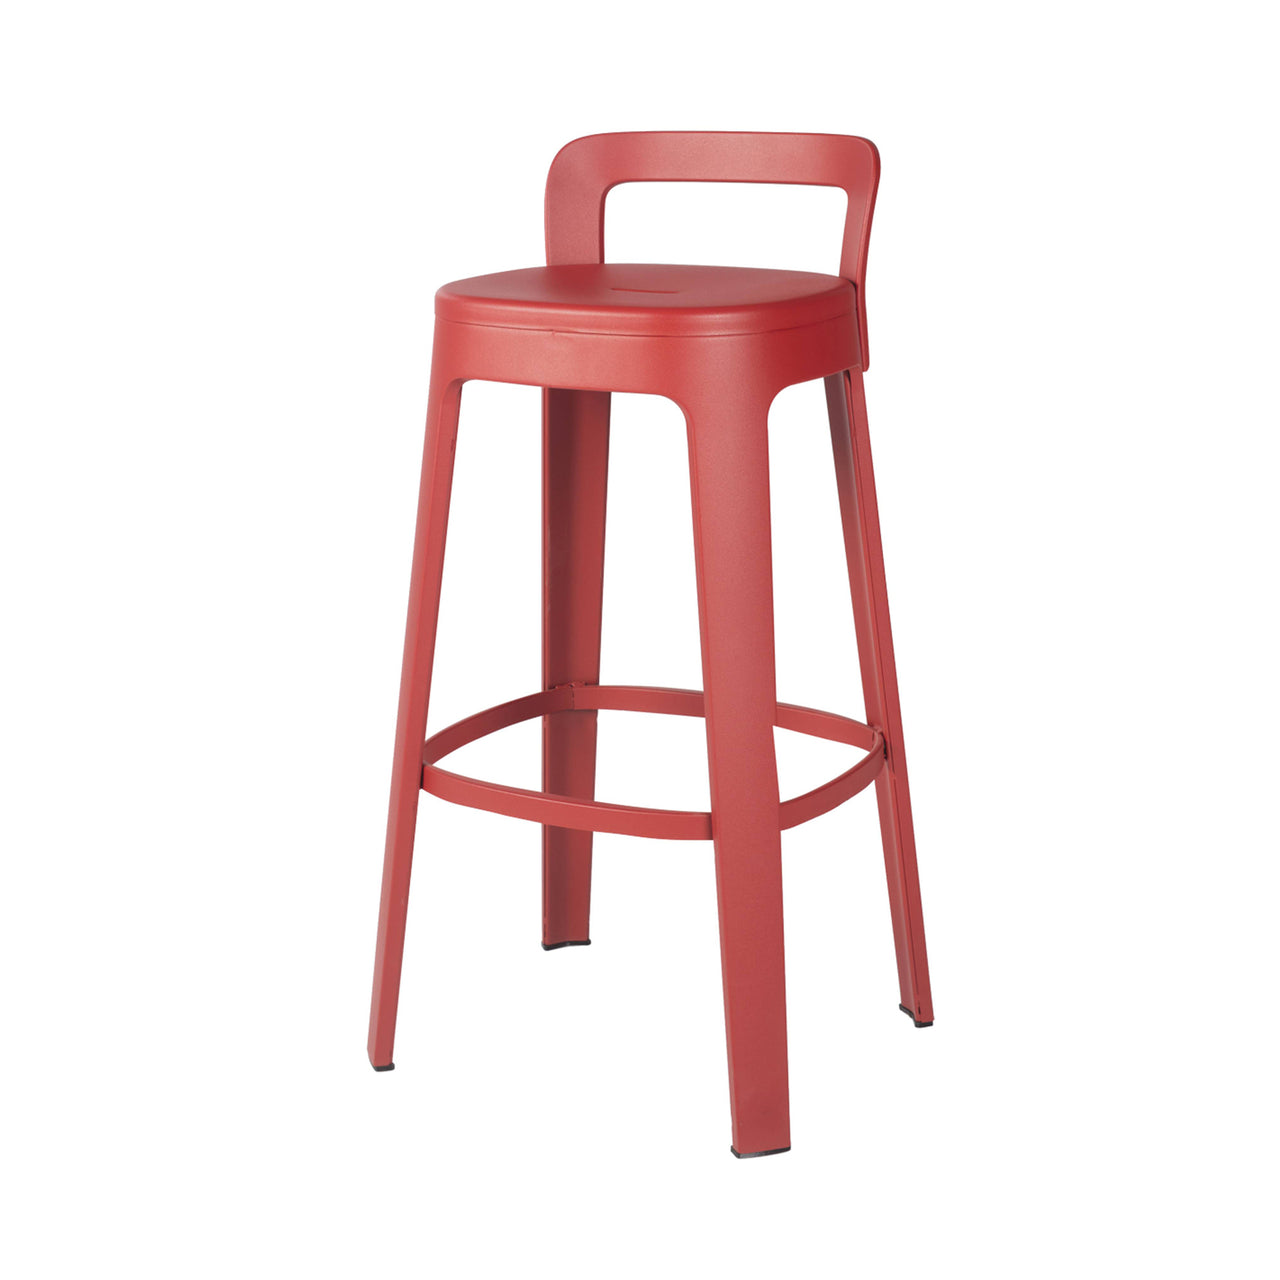 Ombra Bar + Counter Stool with Backrest: Bar + Red